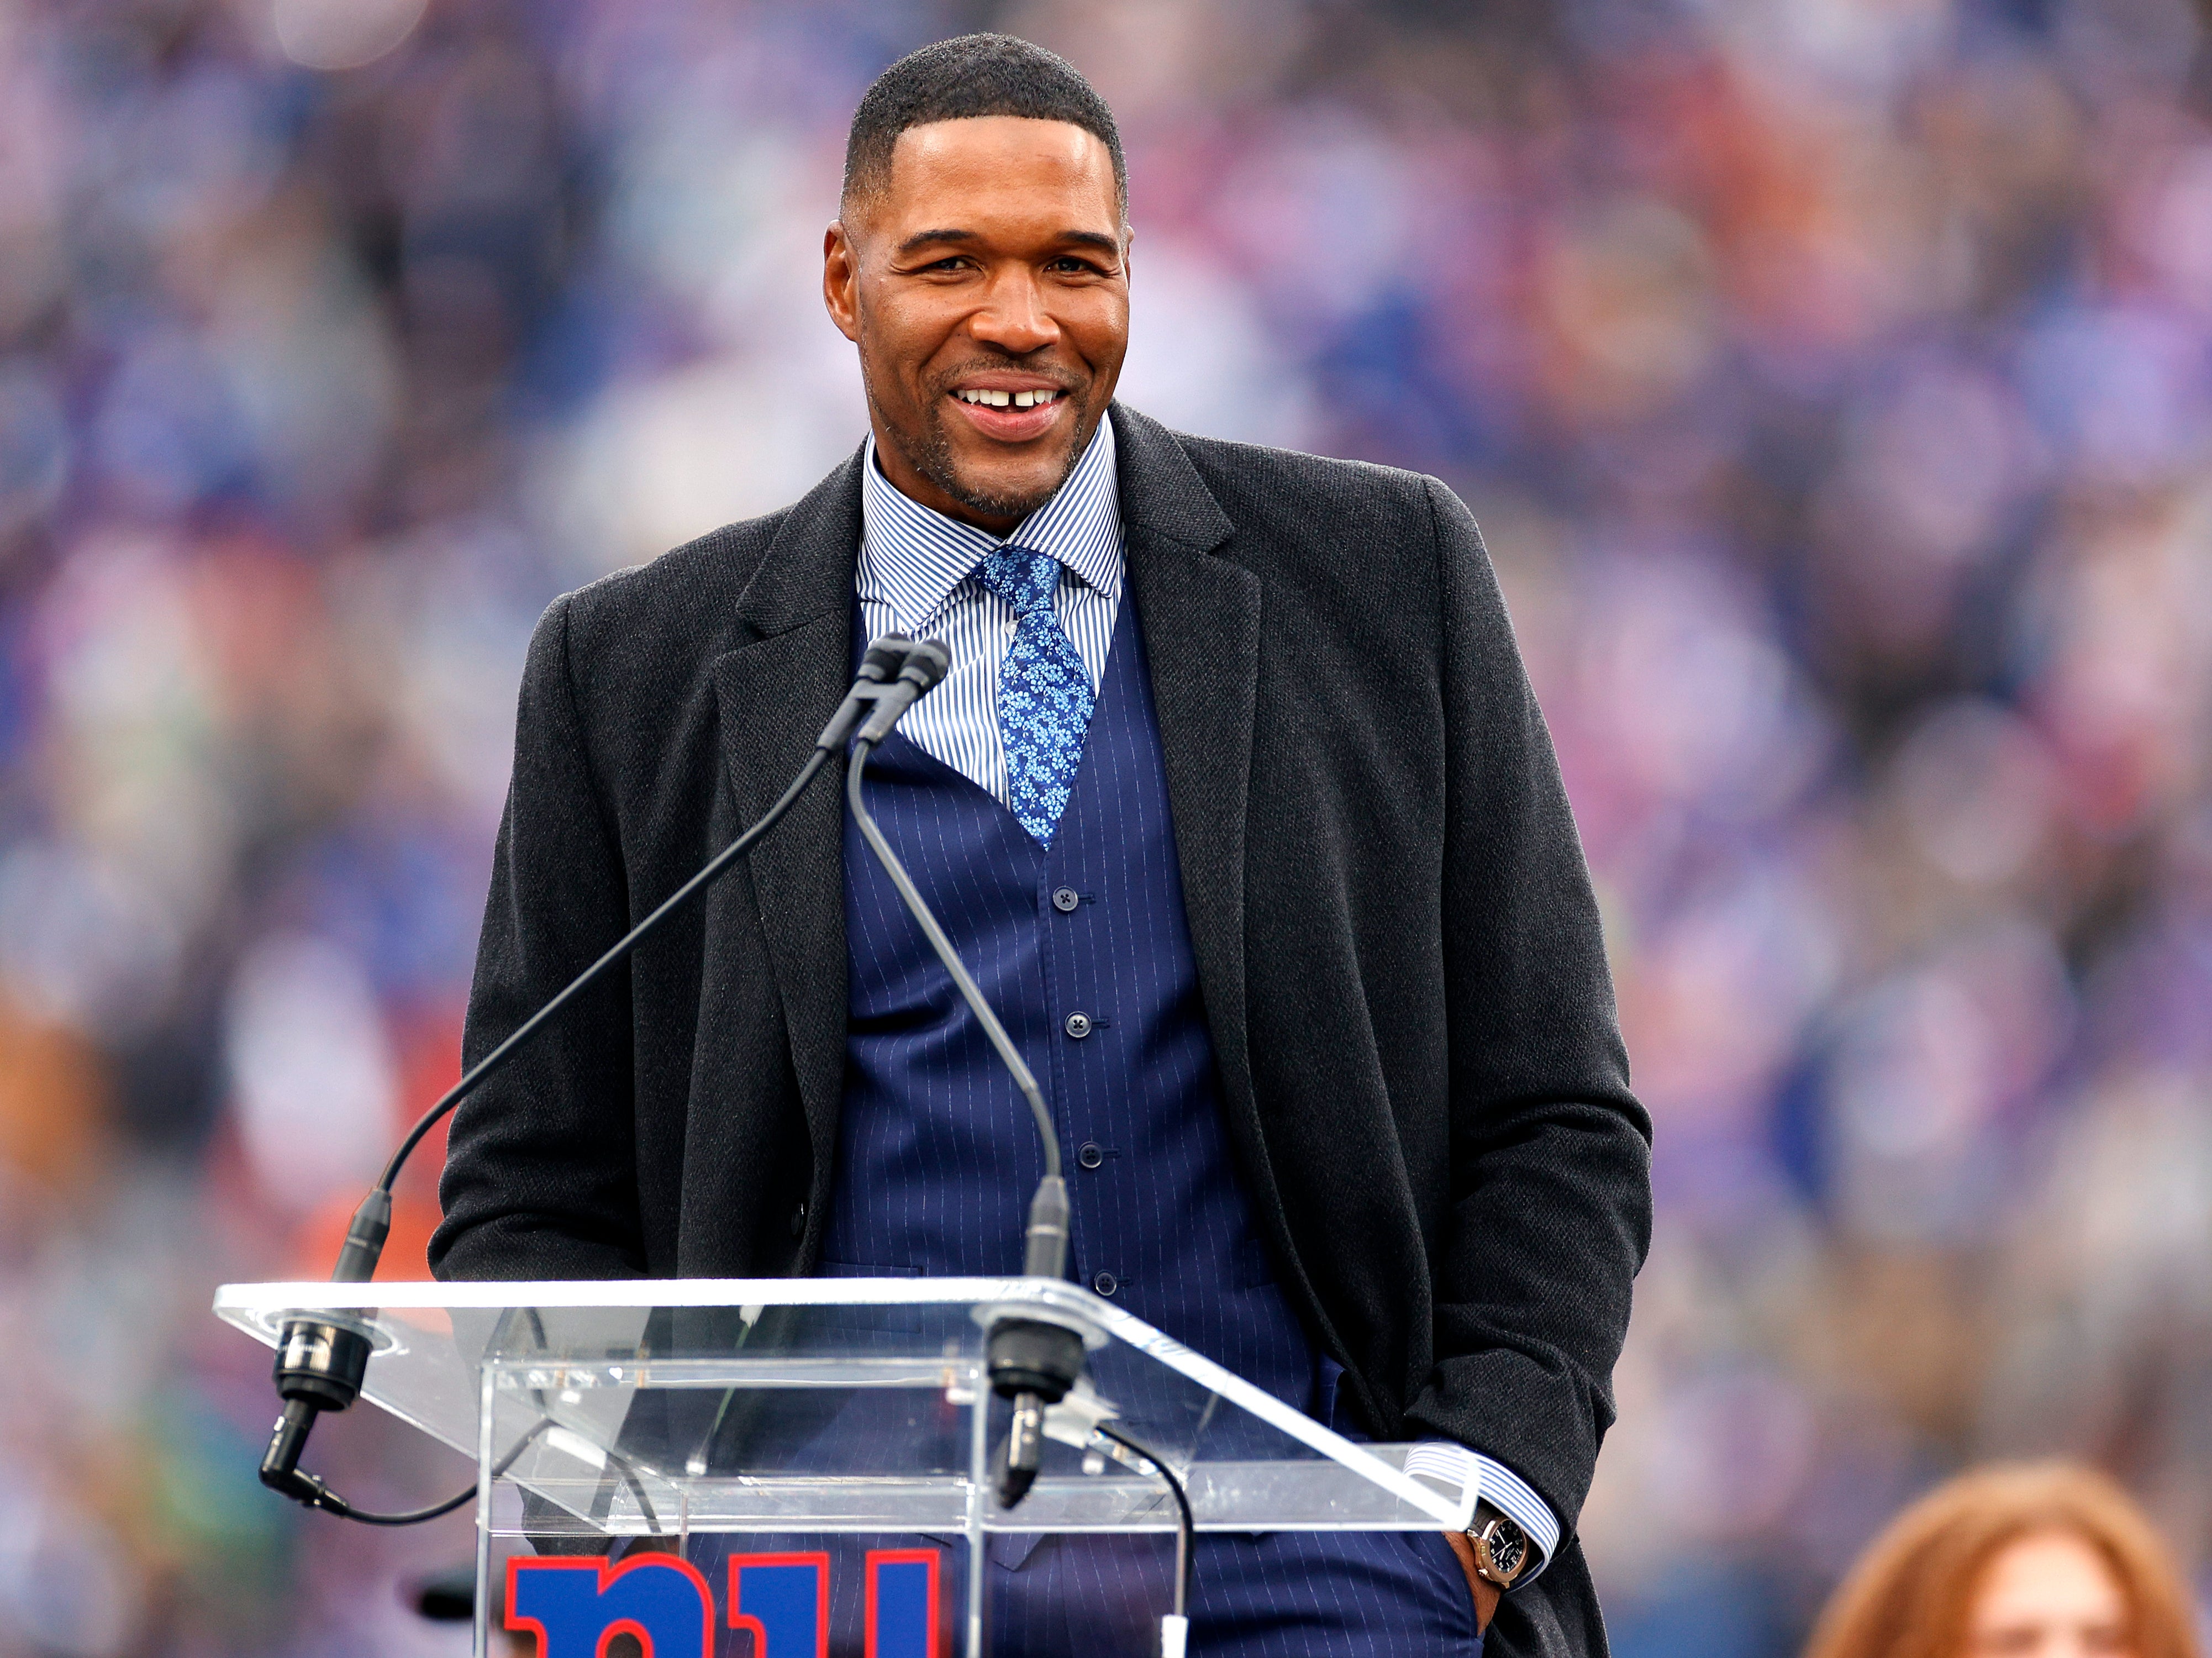 Michael Strahan speaks during the ceremony to retire his number at half time of the game between the Philadelphia Eagles and the New York Giants at MetLife Stadium on 28 November 2021 in East Rutherford, New Jersey